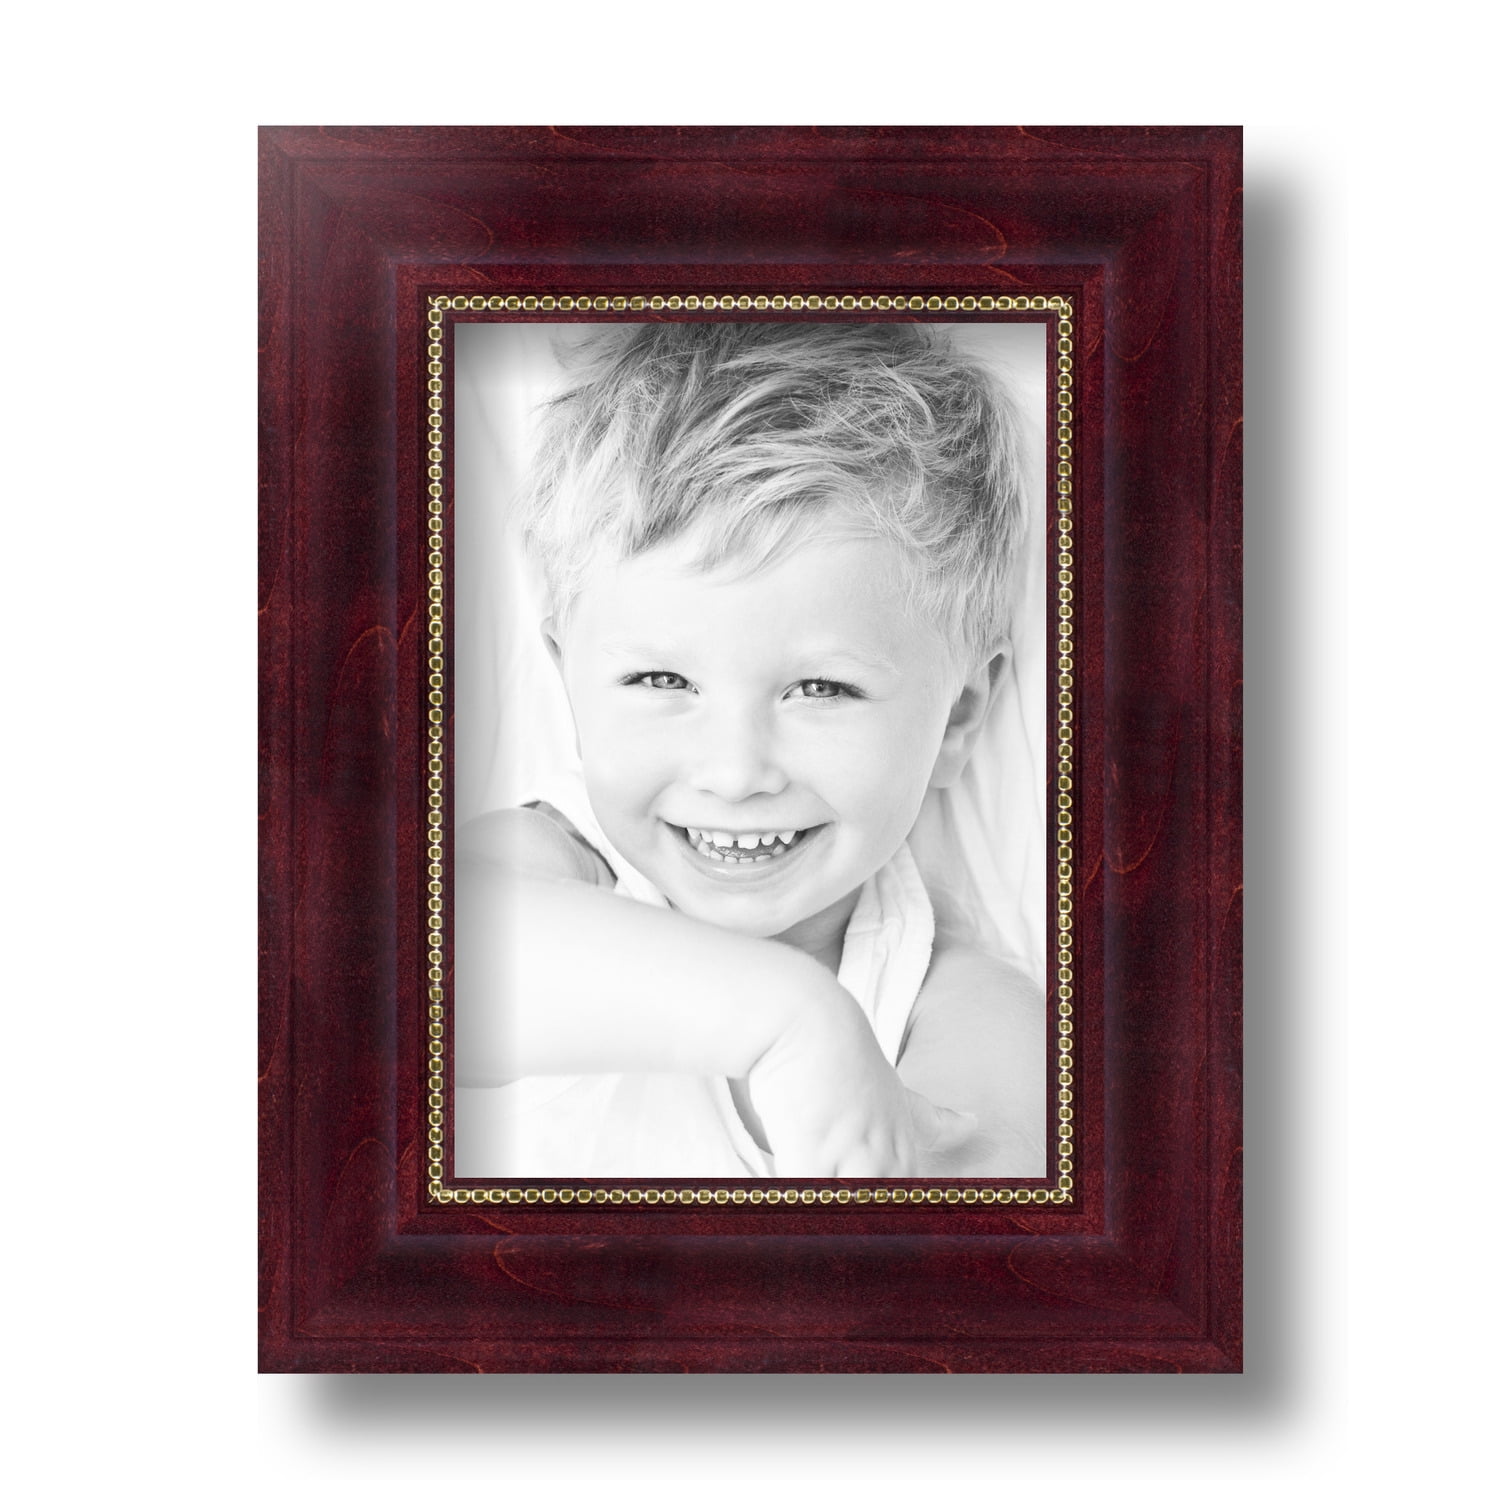 ArtToFrames 1.5" Custom Poster Frame Red Cherry Stain Wood 4333 Large 